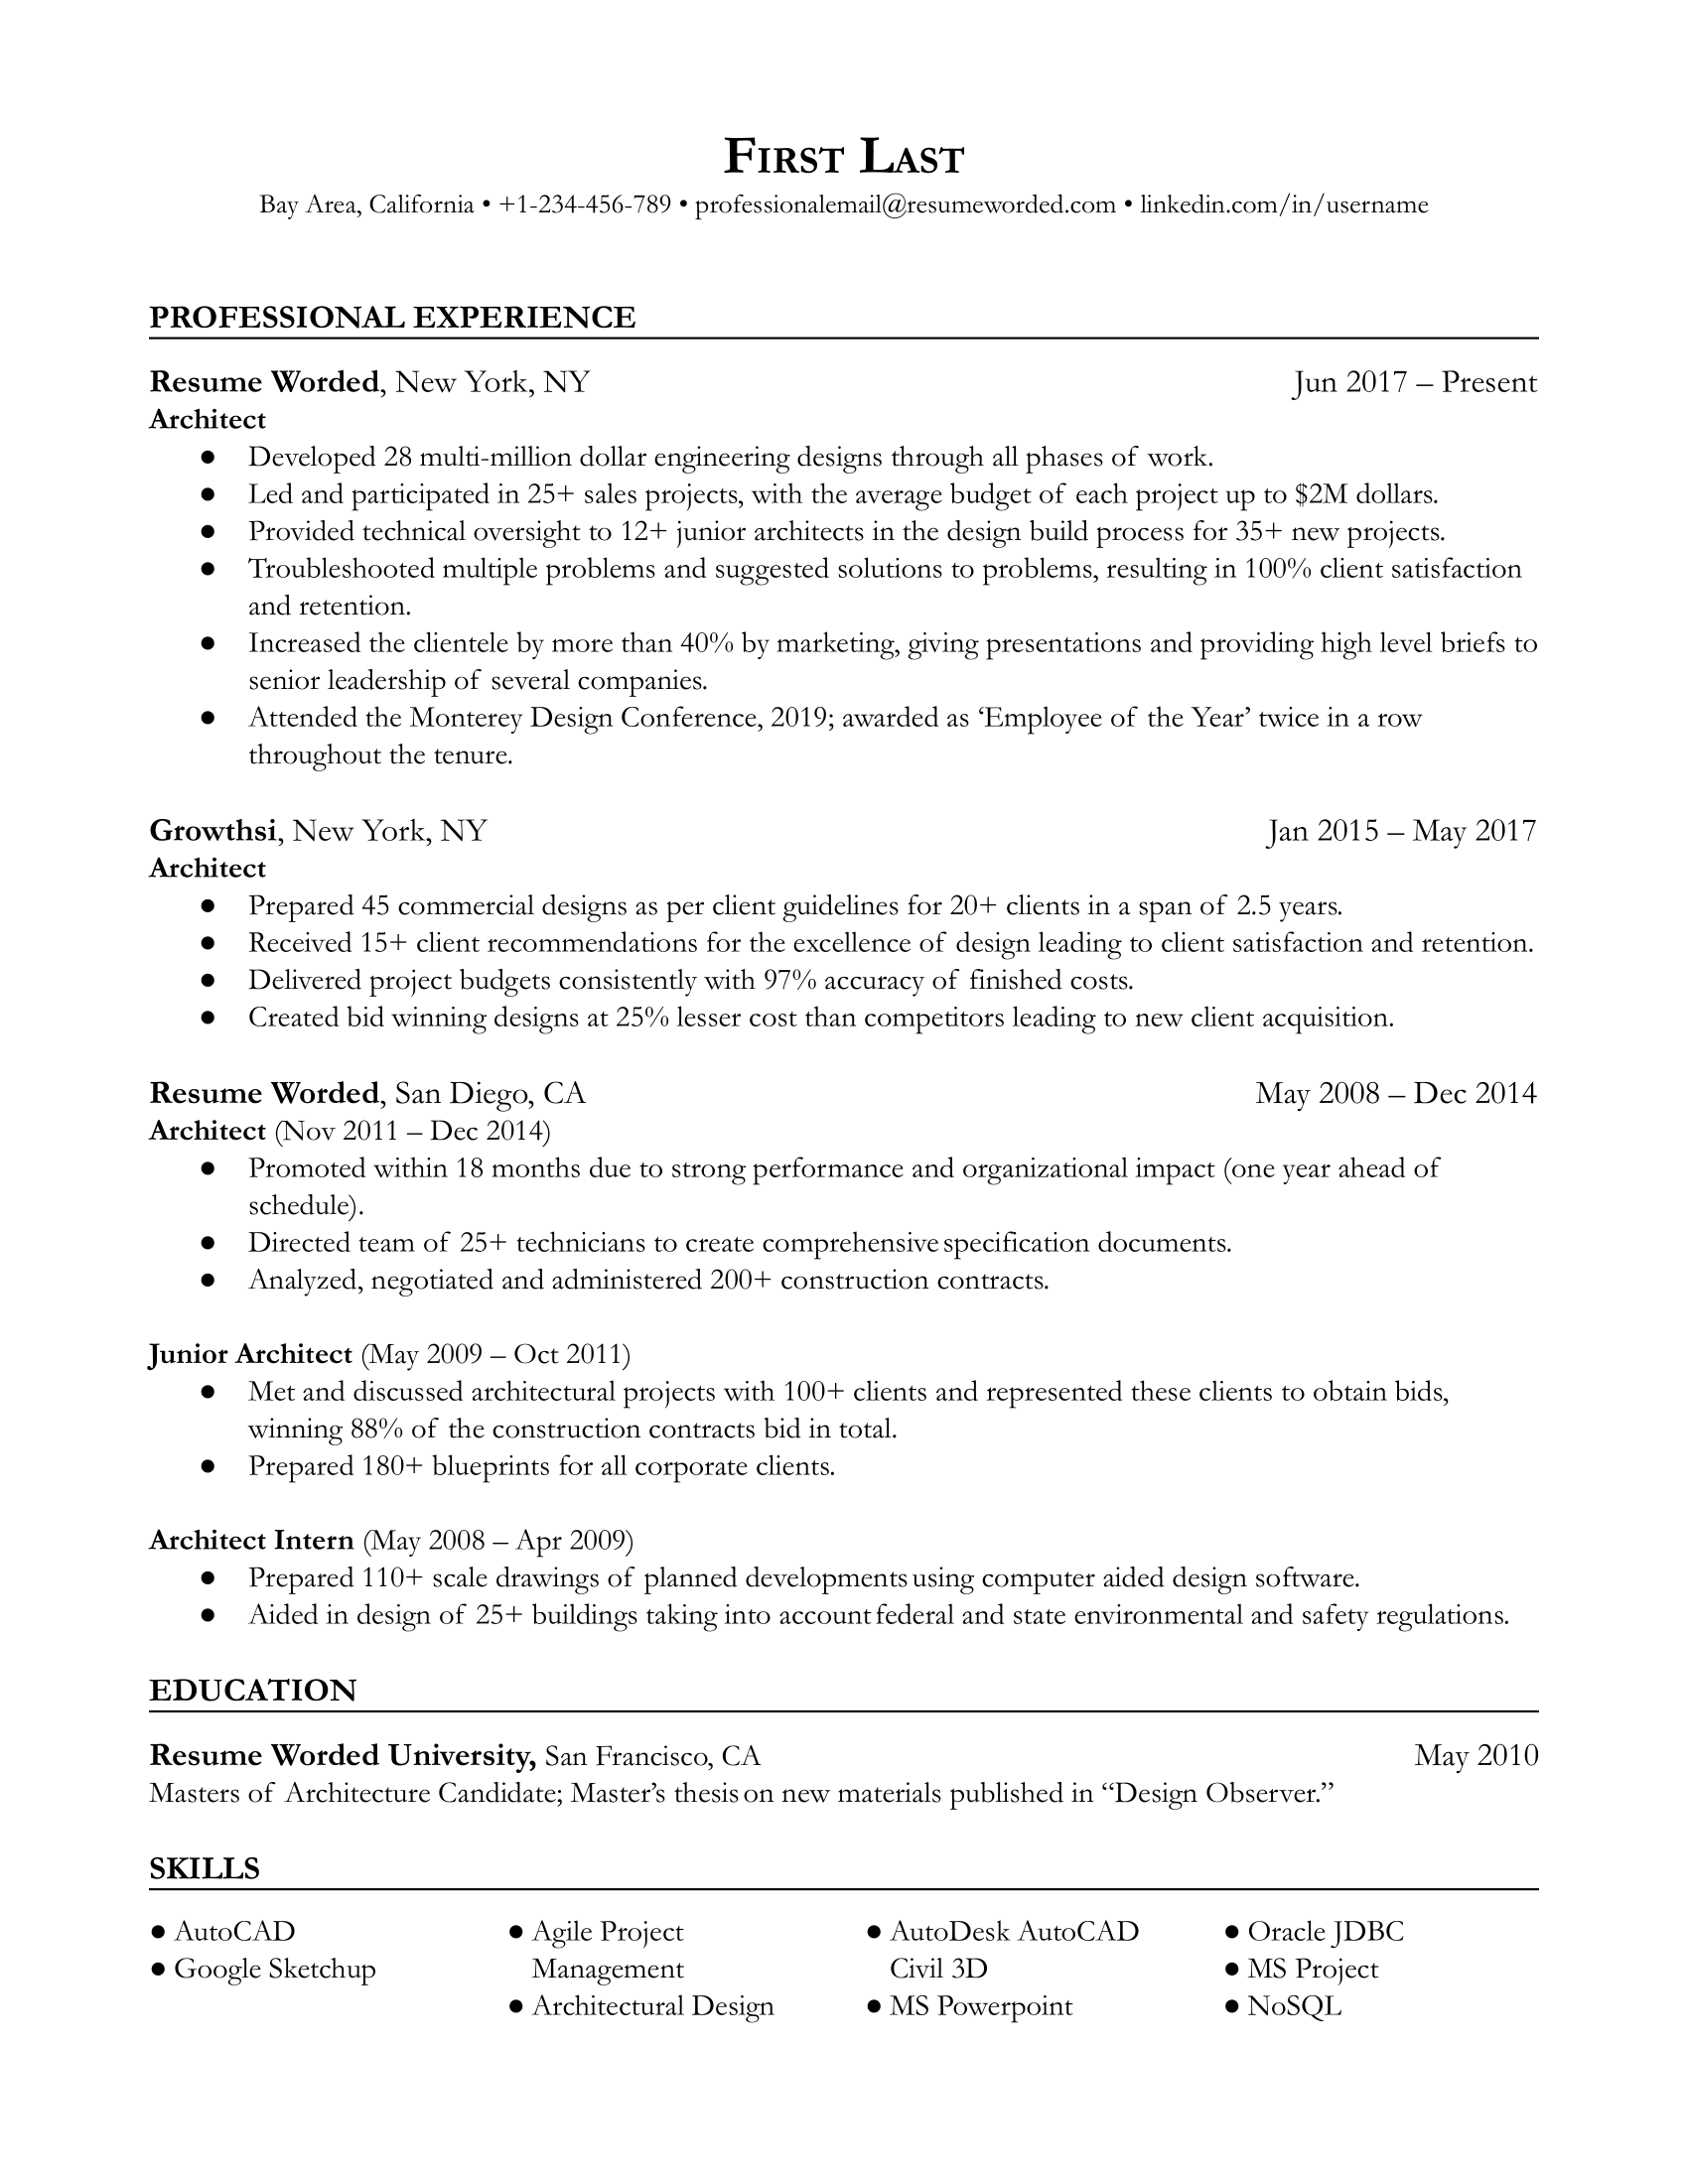 Architect resume sample template using bullet points to highlight soft skills and accomplishments